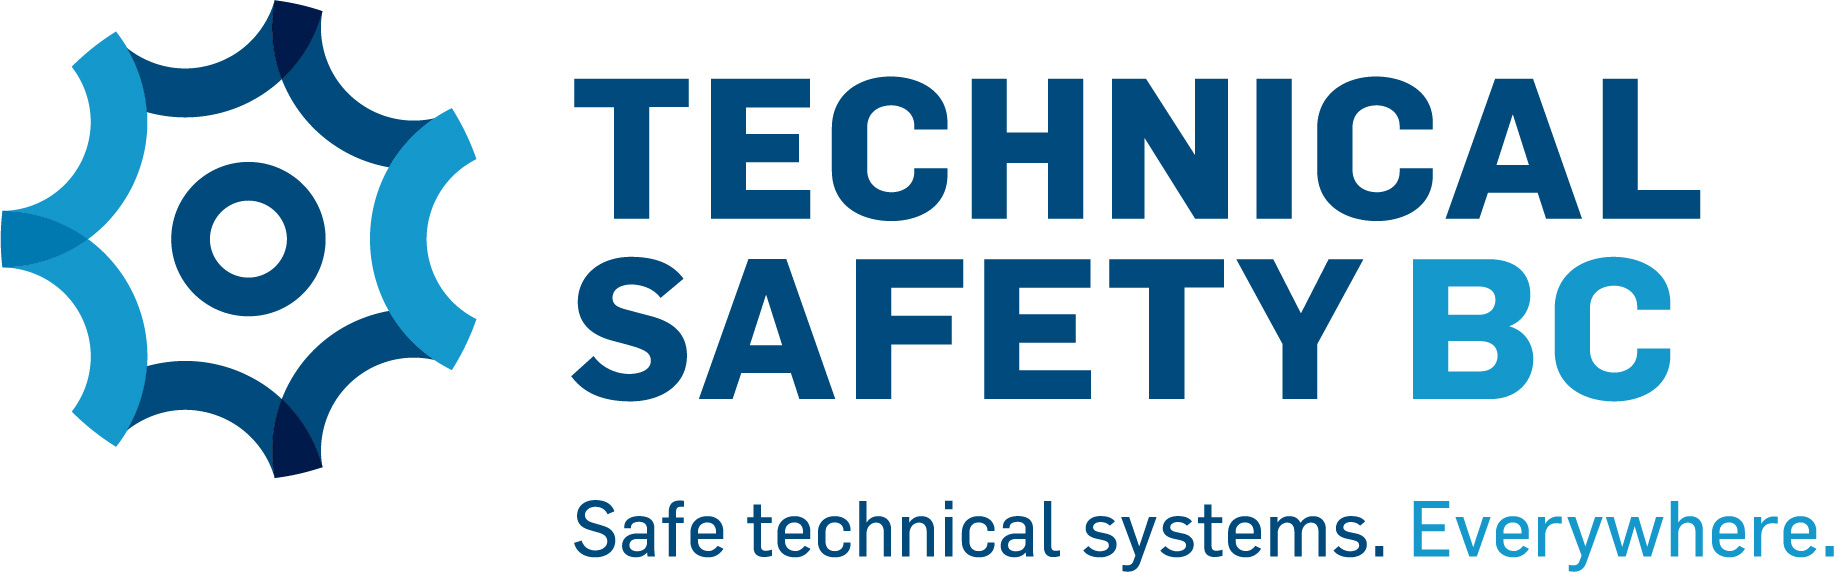 Technical Safety BC 